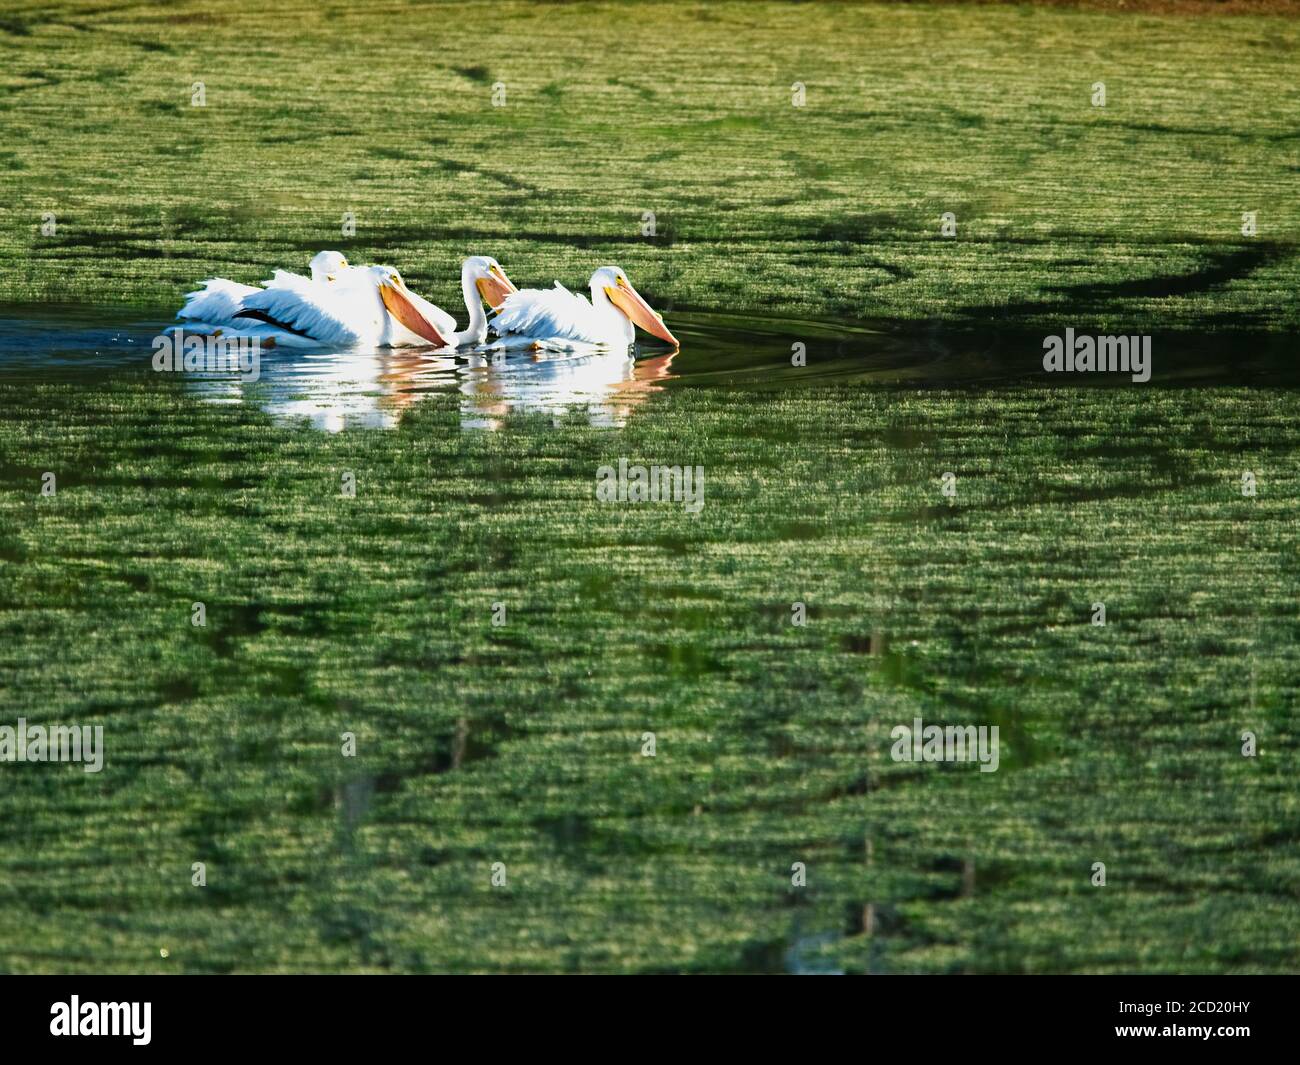 The Woodlands TX USA - 02-07-2020 - Great White Pelicans In Green Pond Stockfoto